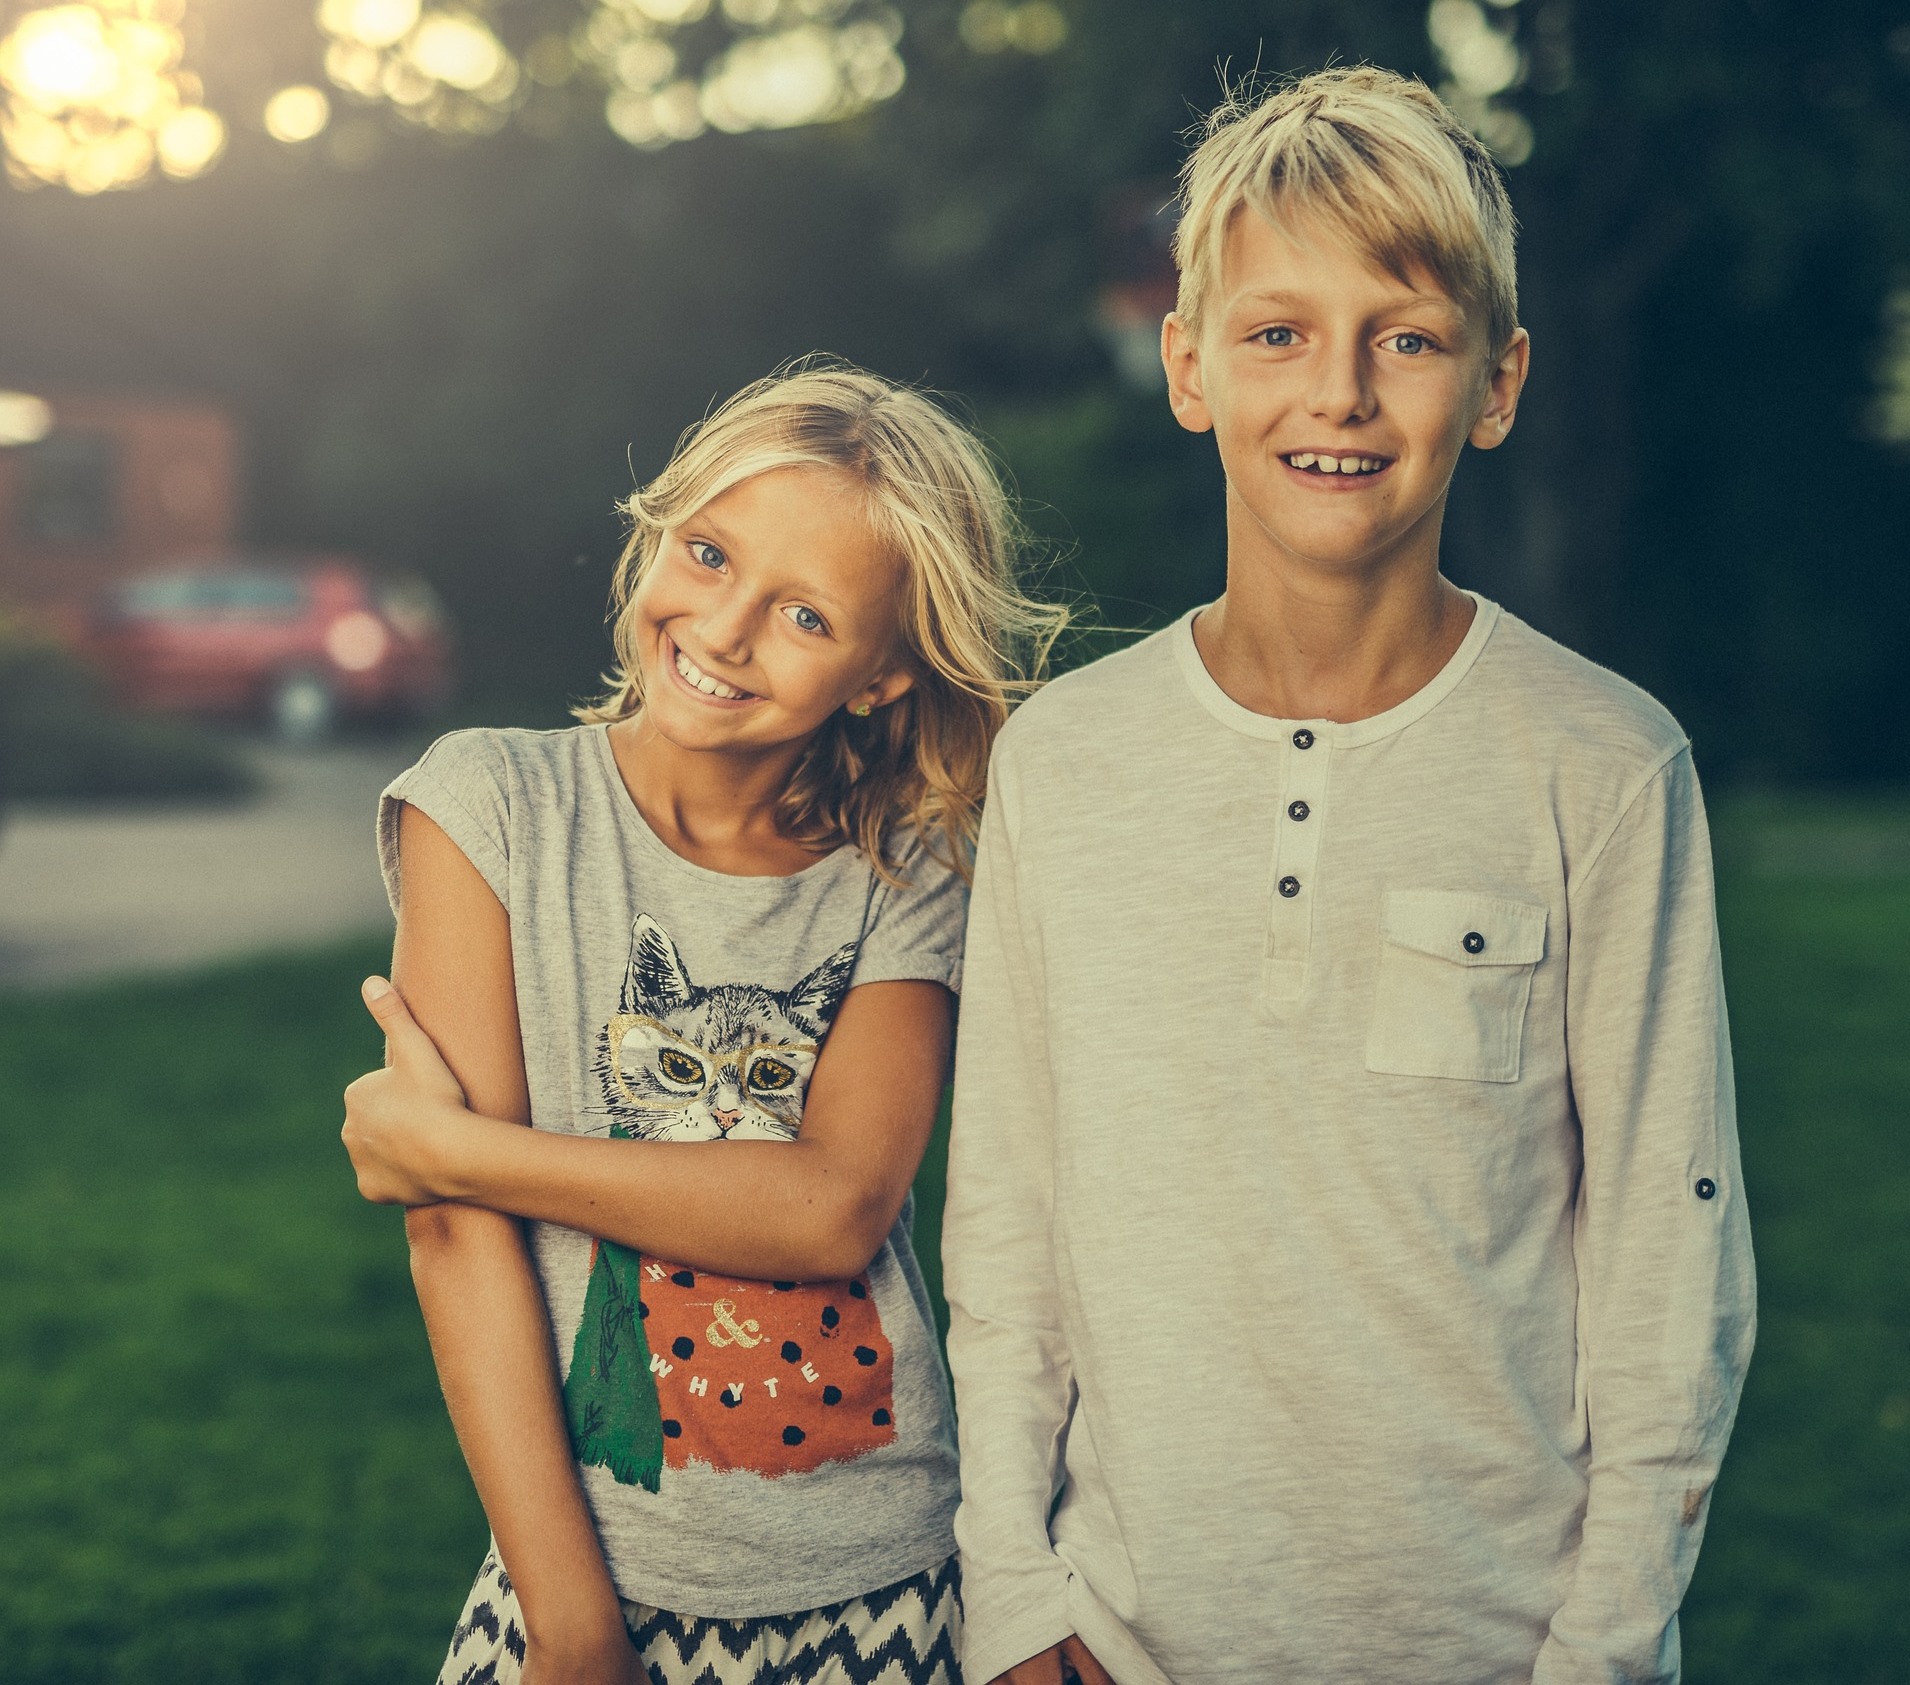 Birth Order & ADHD: Is There a Link?